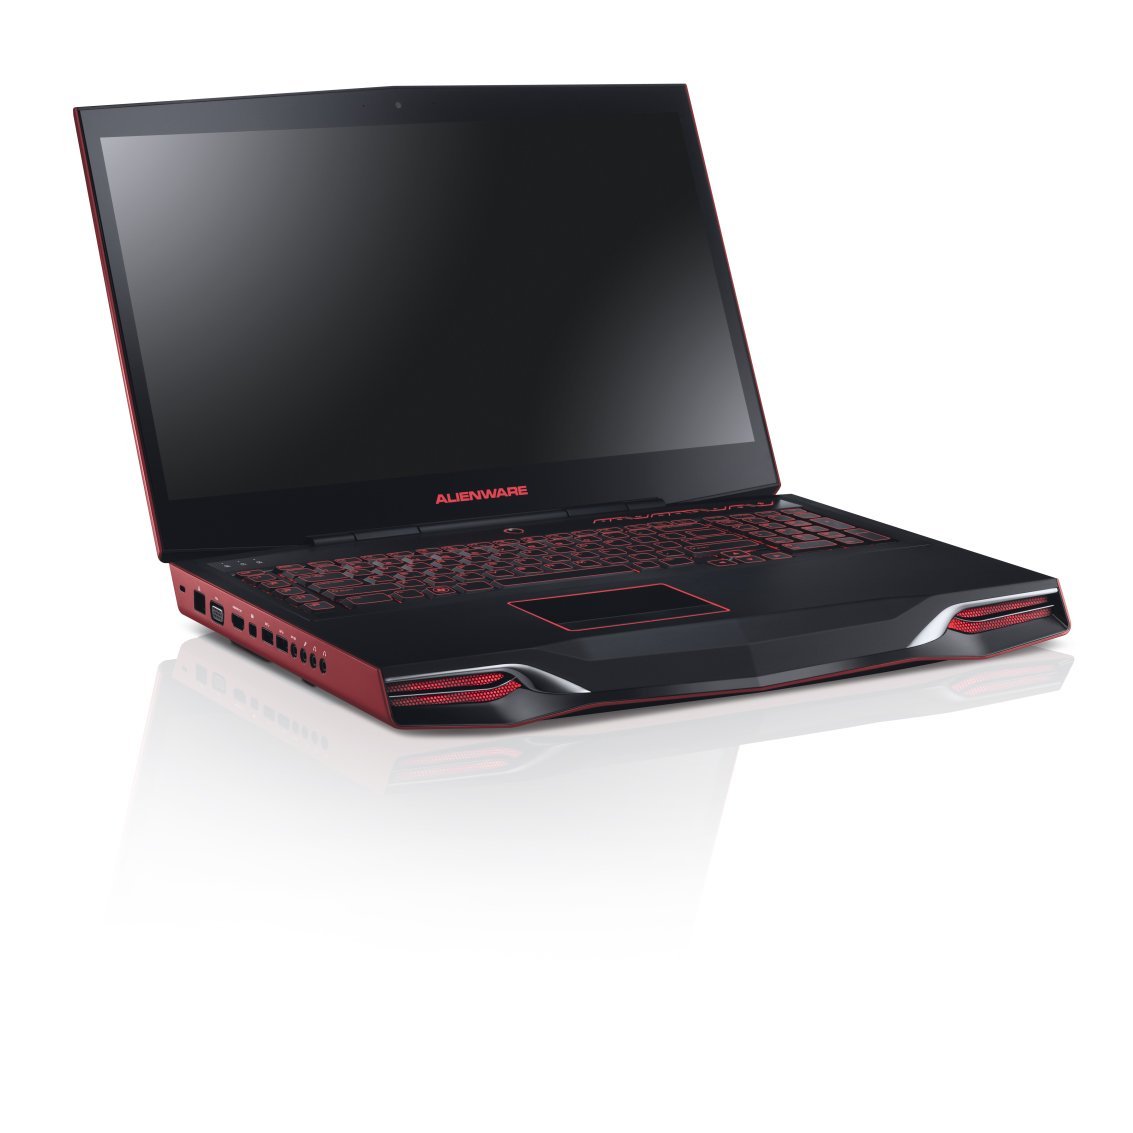 http://thetechjournal.com/wp-content/uploads/images/1206/1340513148-alienware-m17xr3-17inch-gaming-laptop-7.jpg